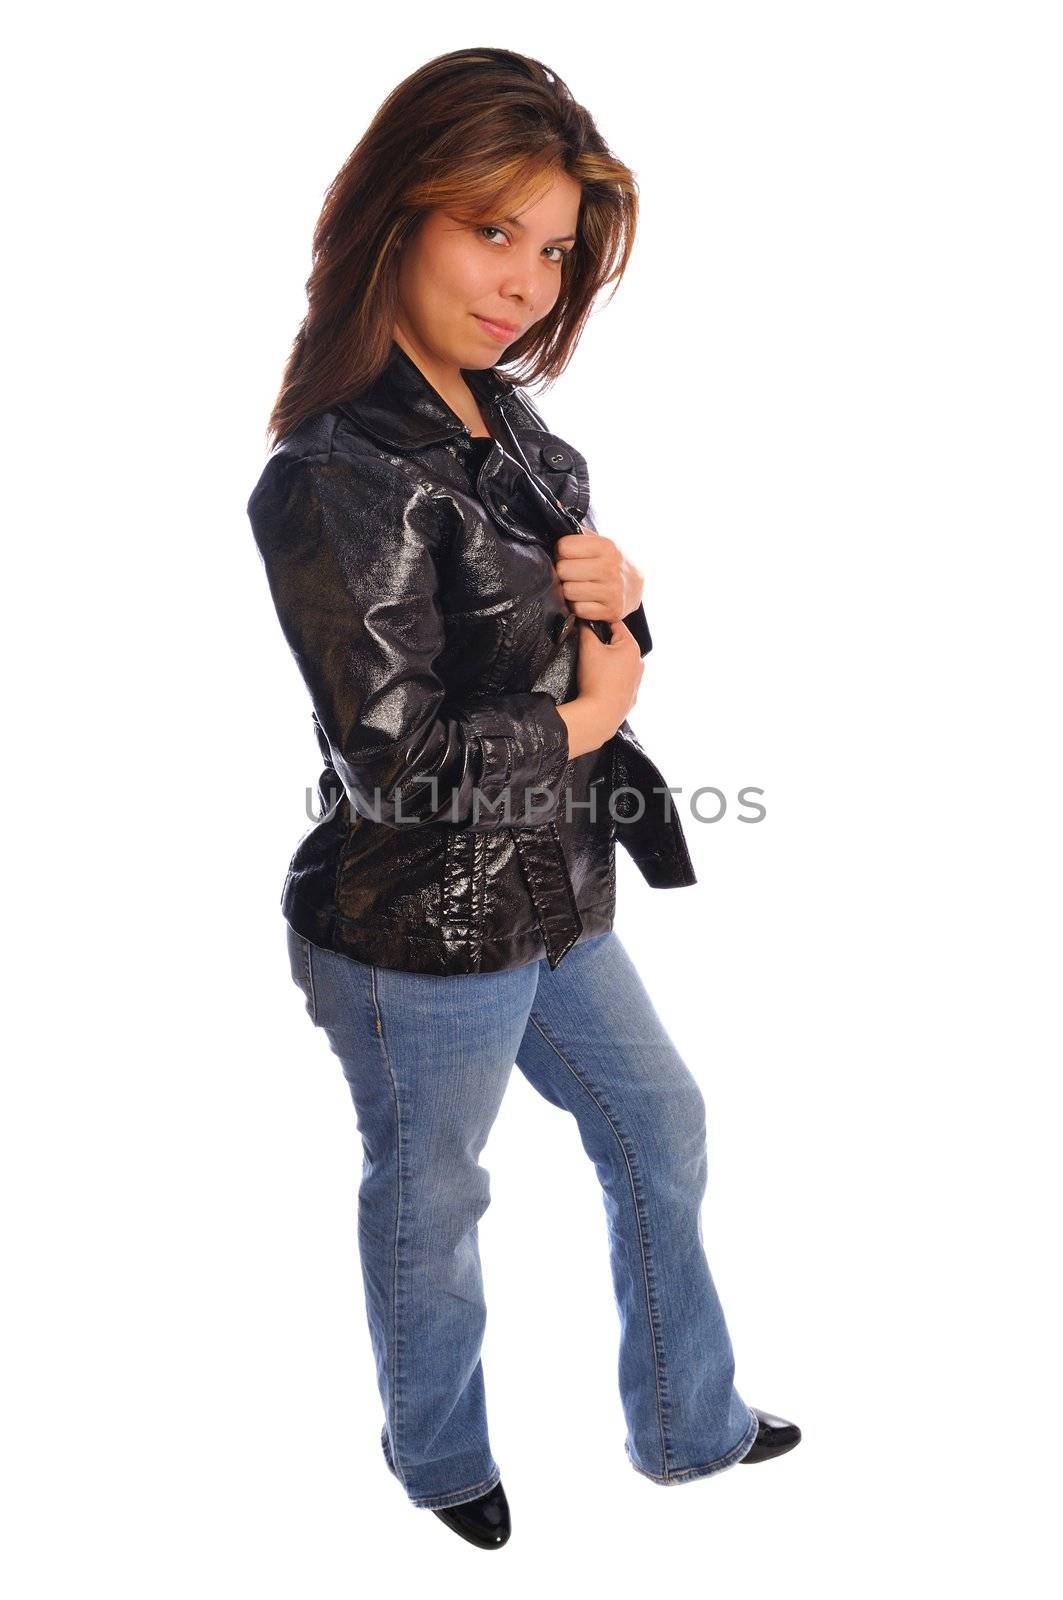 an attractive model dressed in casual fashion on a white background